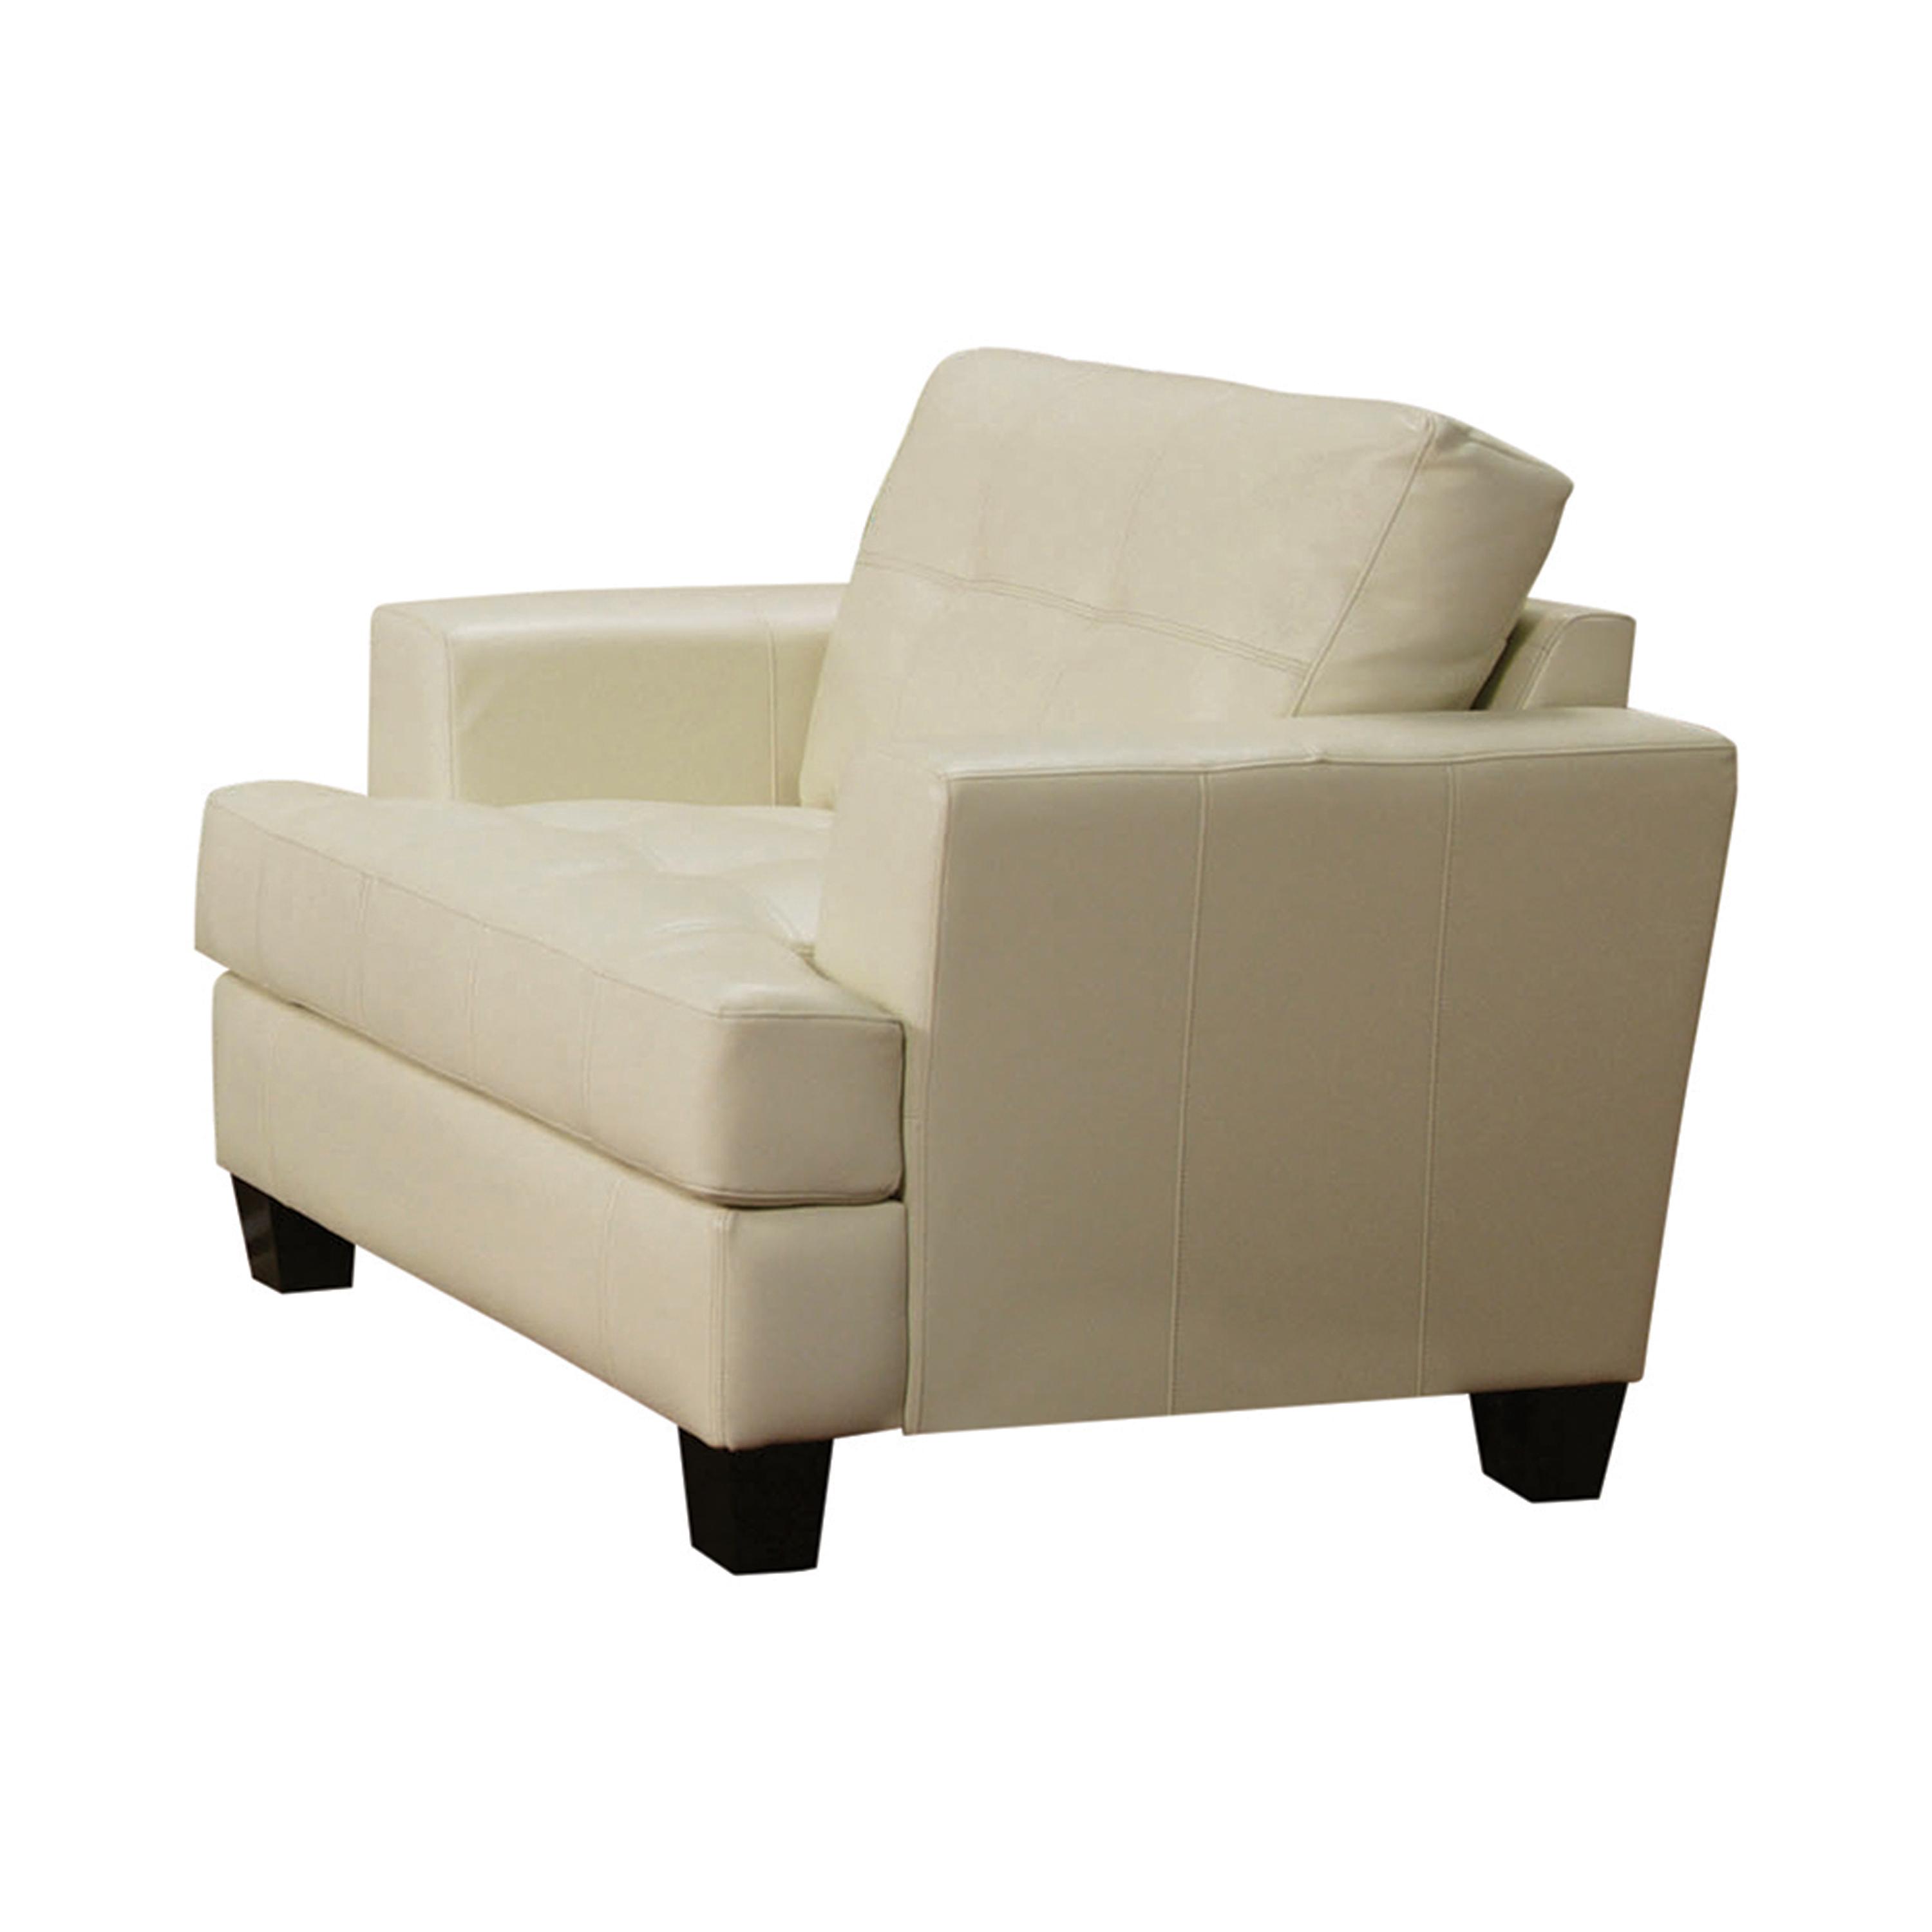 Transitional Arm Chair 501693 Samuel 501693 in Cream Leatherette